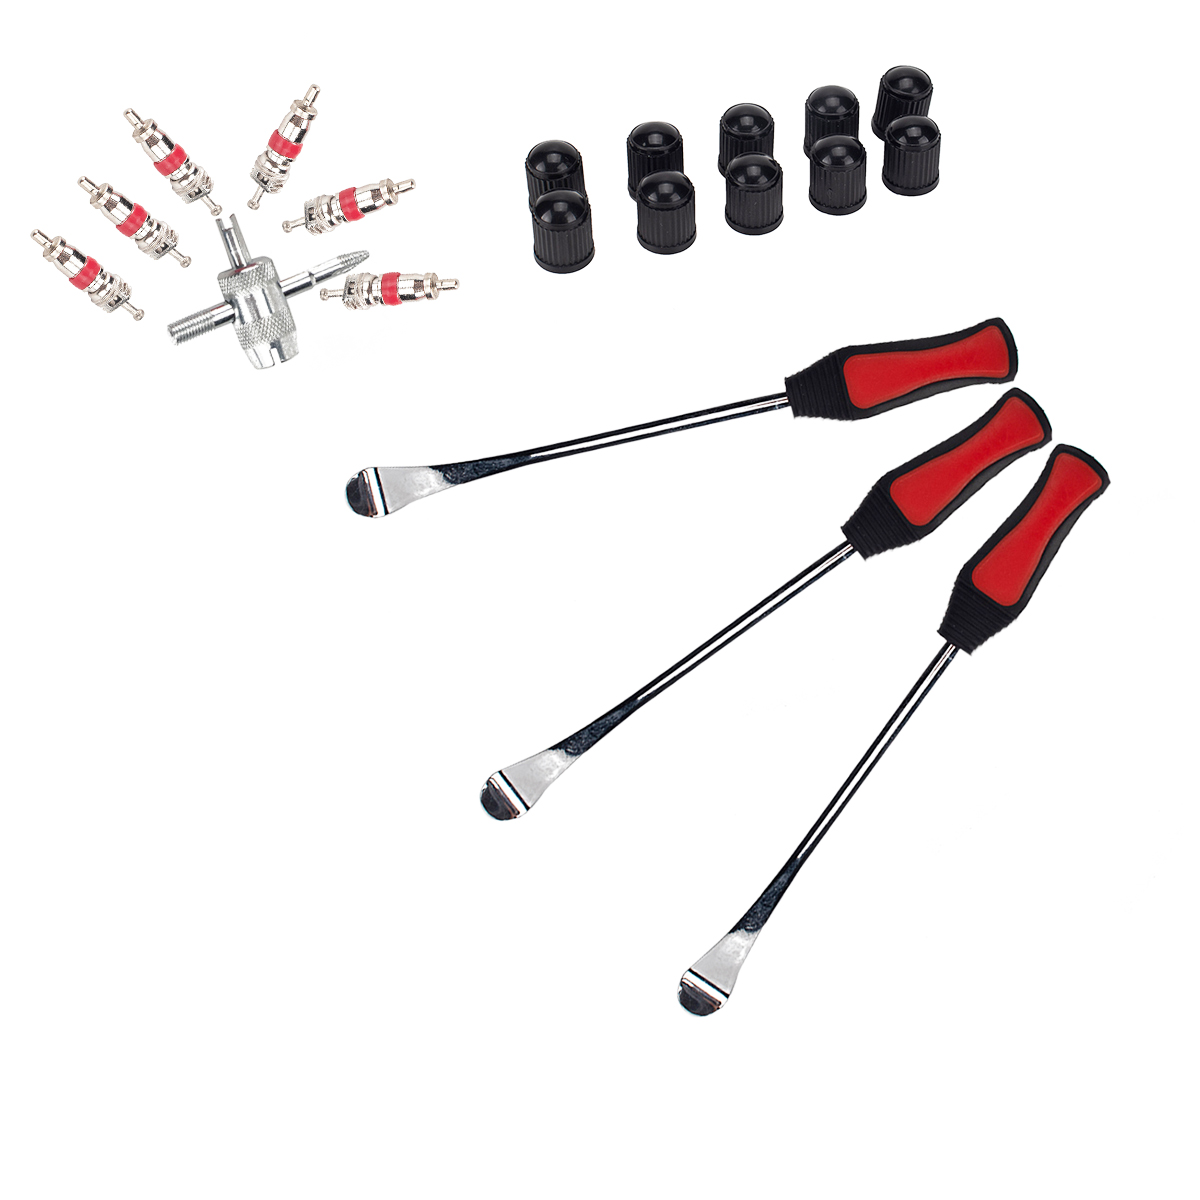 Tire Spoons Lever Motorcycle Dirt Bike Lawn Mower Tire Changing Tools with Bag A2975 (3 crowbars + 10 valve caps + 1 four-in-one repair tool + 6 valve cores)